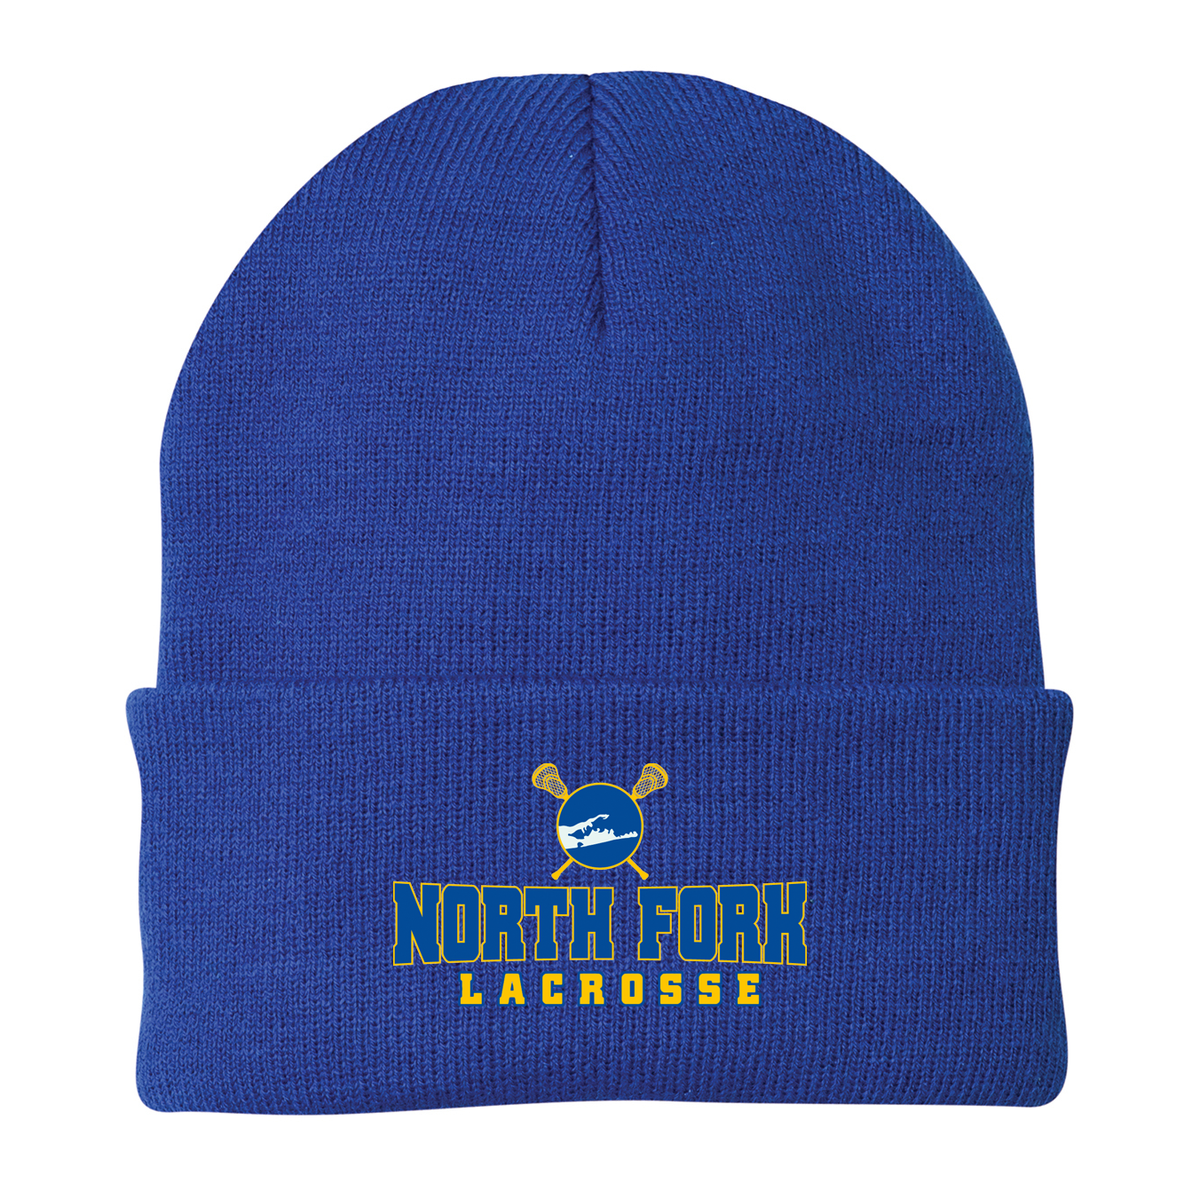 North Fork Lacrosse Knit Beanie